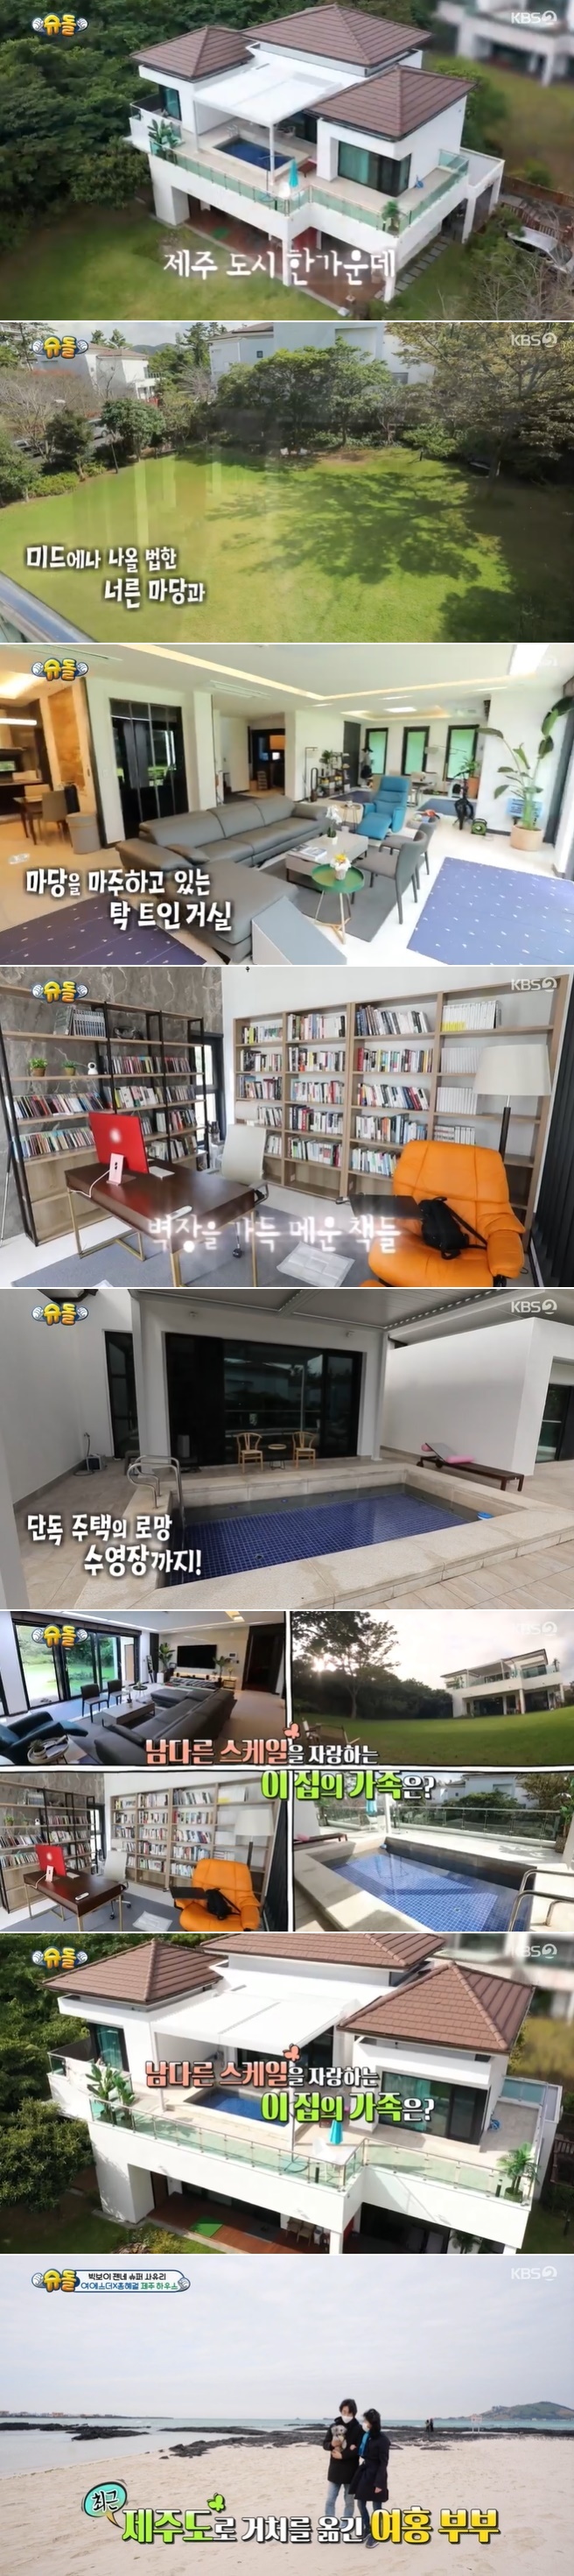 A pension-cheeking Jeju Island detached house by the Hong Hye-geol and Yeo Esther couple has been unveiled.On October 31, KBS 2TV The Return of Superman recently released the house of Hong Hye-geol and Yeo Esther who moved to Jeju Island.The two medical doctors recently started to live in Jeju with their dogs.The couples house, which was unveiled on the day of the broadcast, attracted attention because it was a luxurious house that was literally seen in Archer Daniels Midland, which has a large yard as well as a single swimming pool.